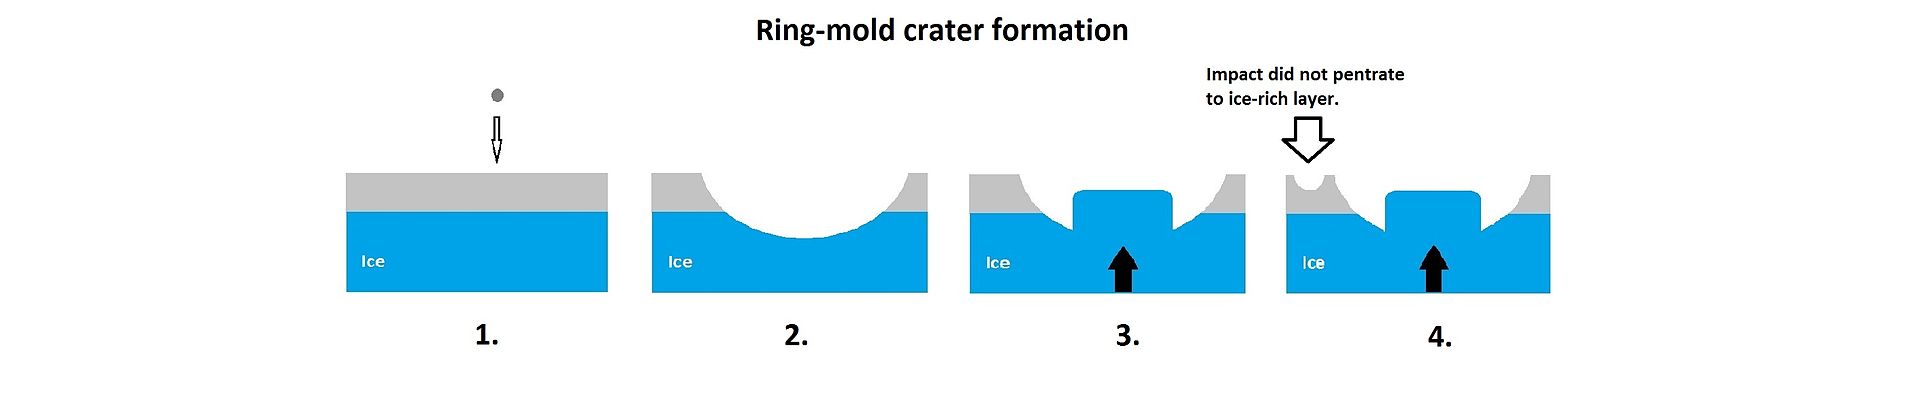 Ring-mold craters form when an impact goes through to an ice layer. The rebound forms the ring-mold shape, and then dust and debris settle on the top to insulate the ice.